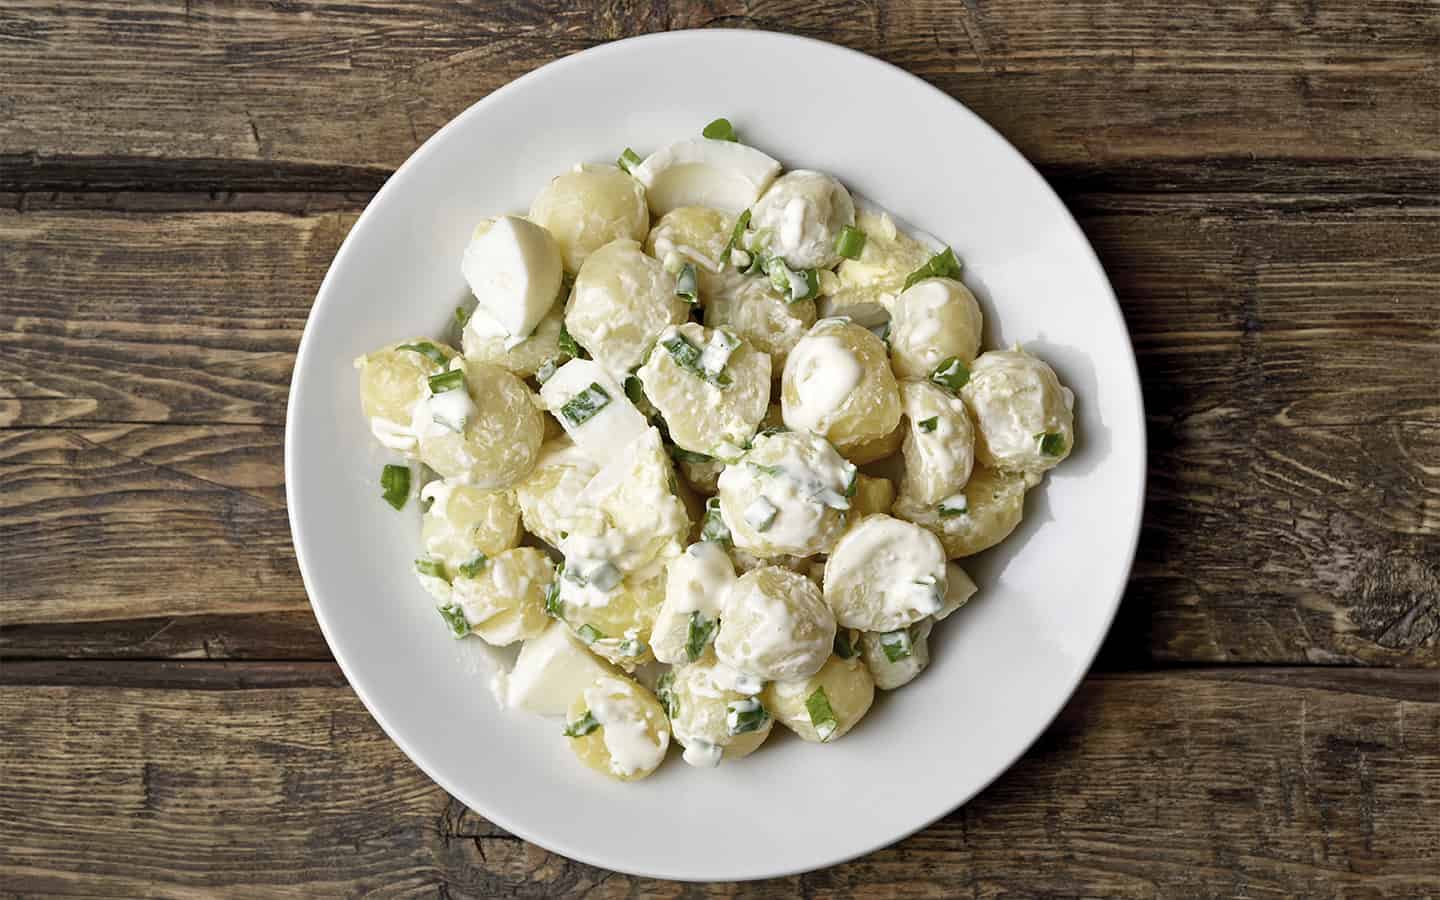 A potato salad for a hot, summery day